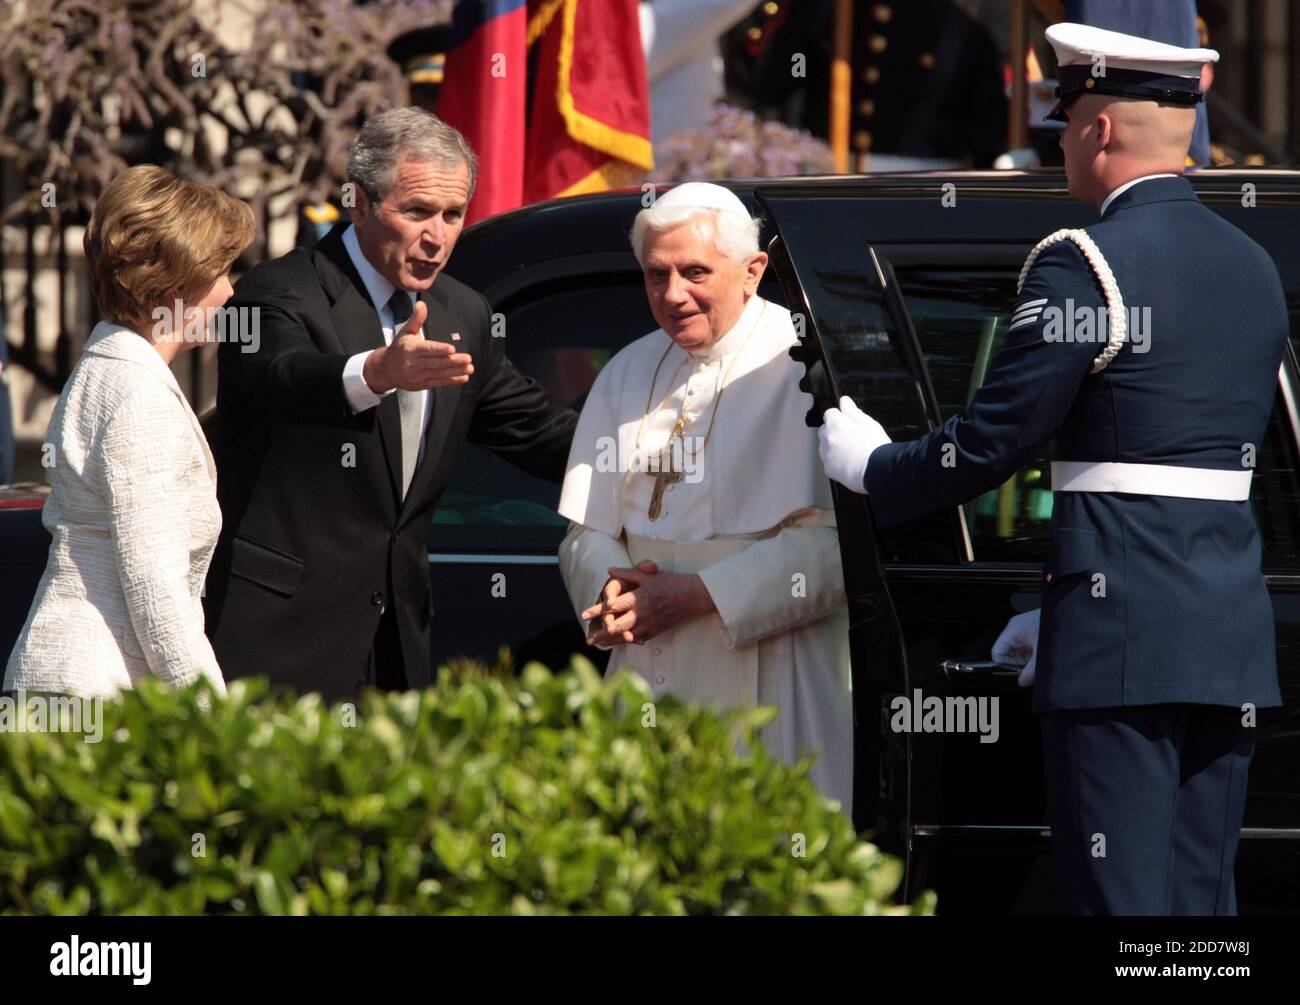 NO FILM, NO VIDEO, NO TV, NO DOCUMENTARY - U.S. President George W. Bush and first lady Laura Bush welcome Pope Benedict XVI to the South Lawn of the White House in Washington, DC, USA, on April 16, 2008. Photo by George Bridges/MCT/ABACAPRESS.COM Stock Photo